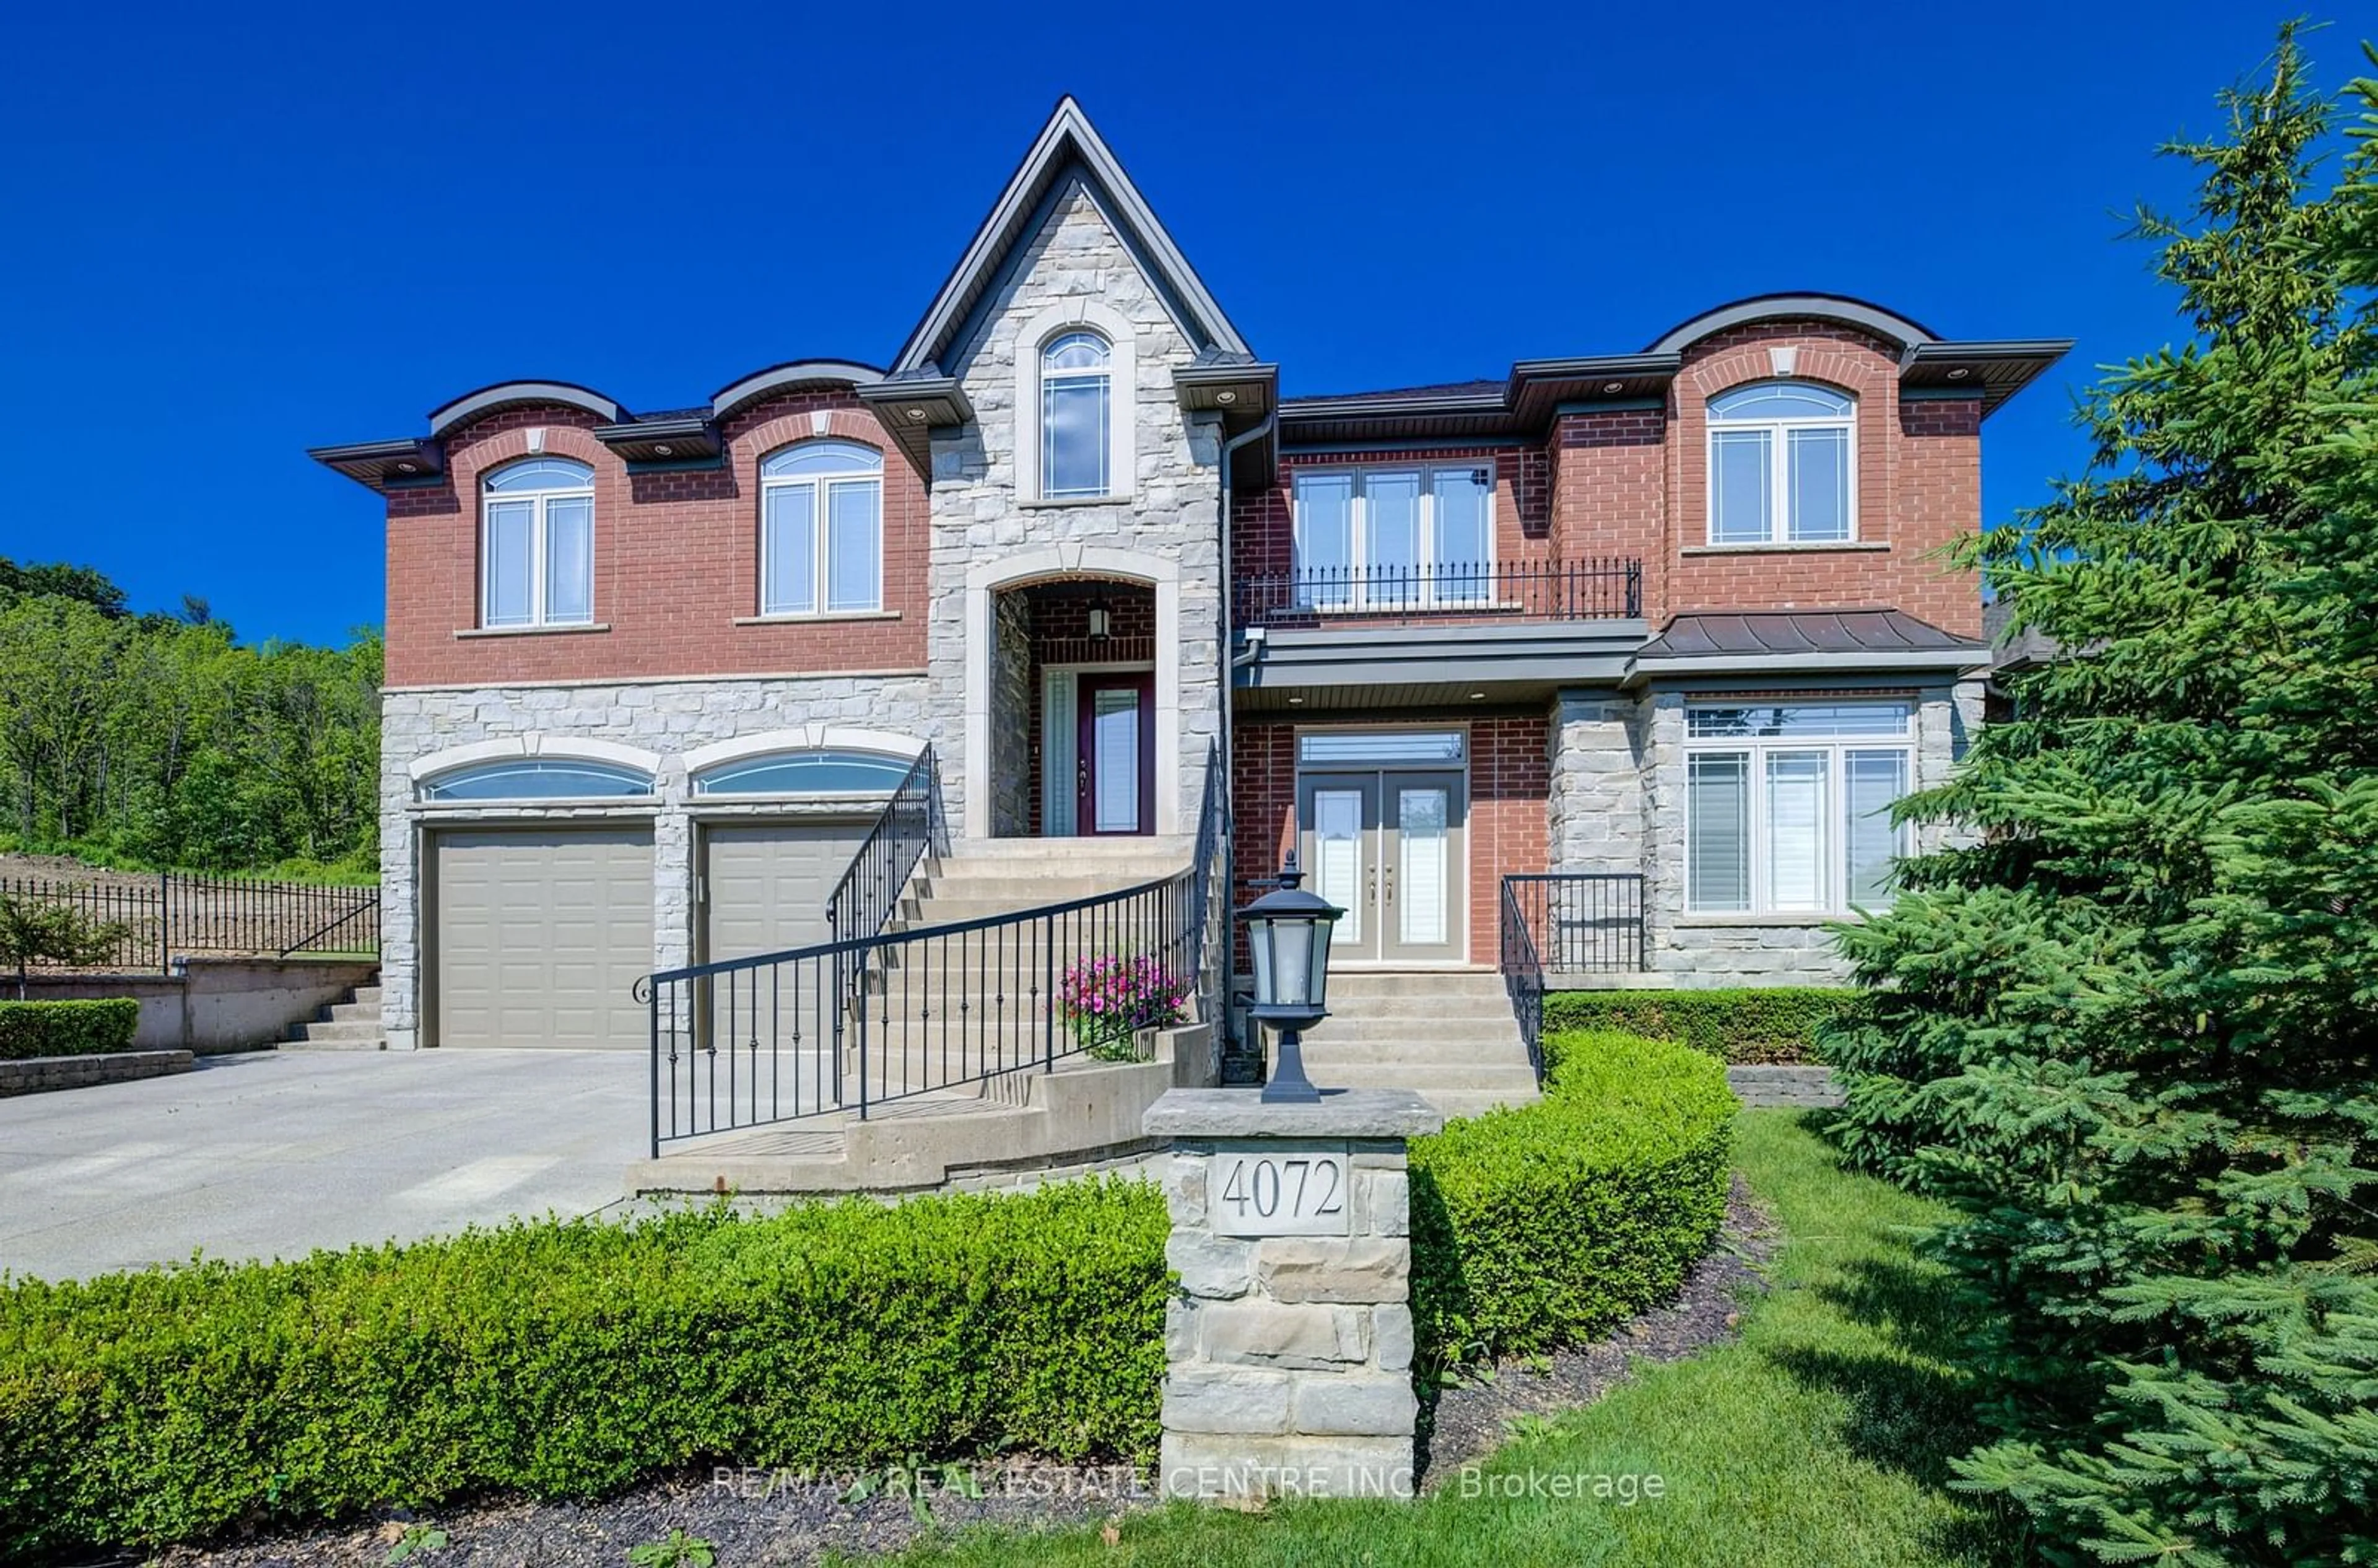 Home with brick exterior material for 4072 Highland Park Dr, Lincoln Ontario L3J 0M3